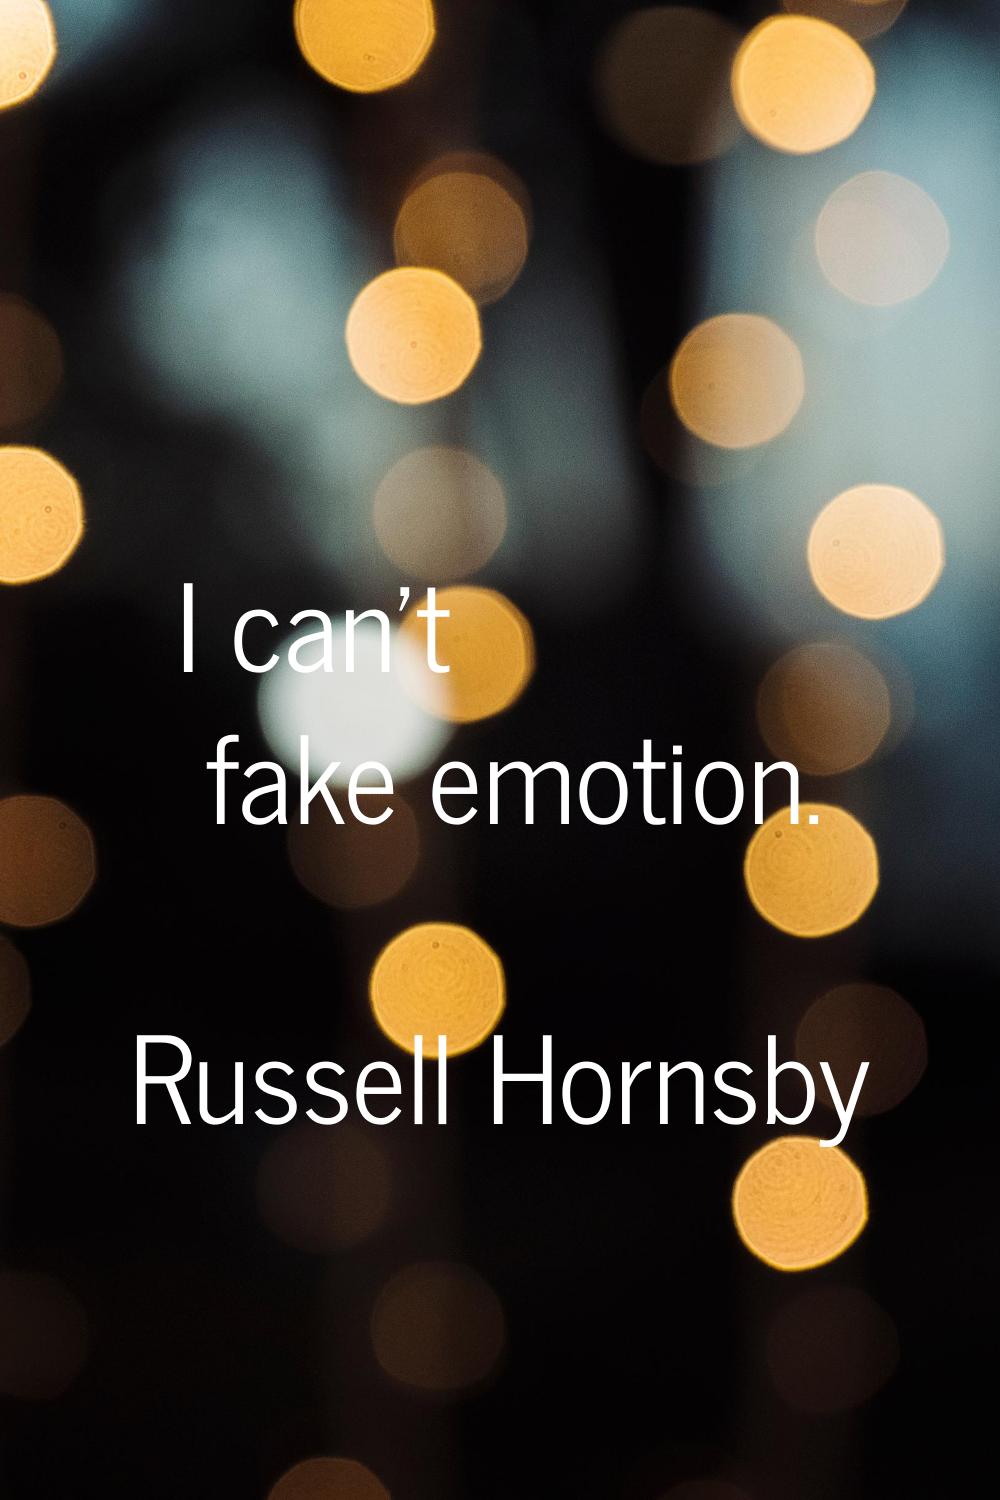 I can't fake emotion.